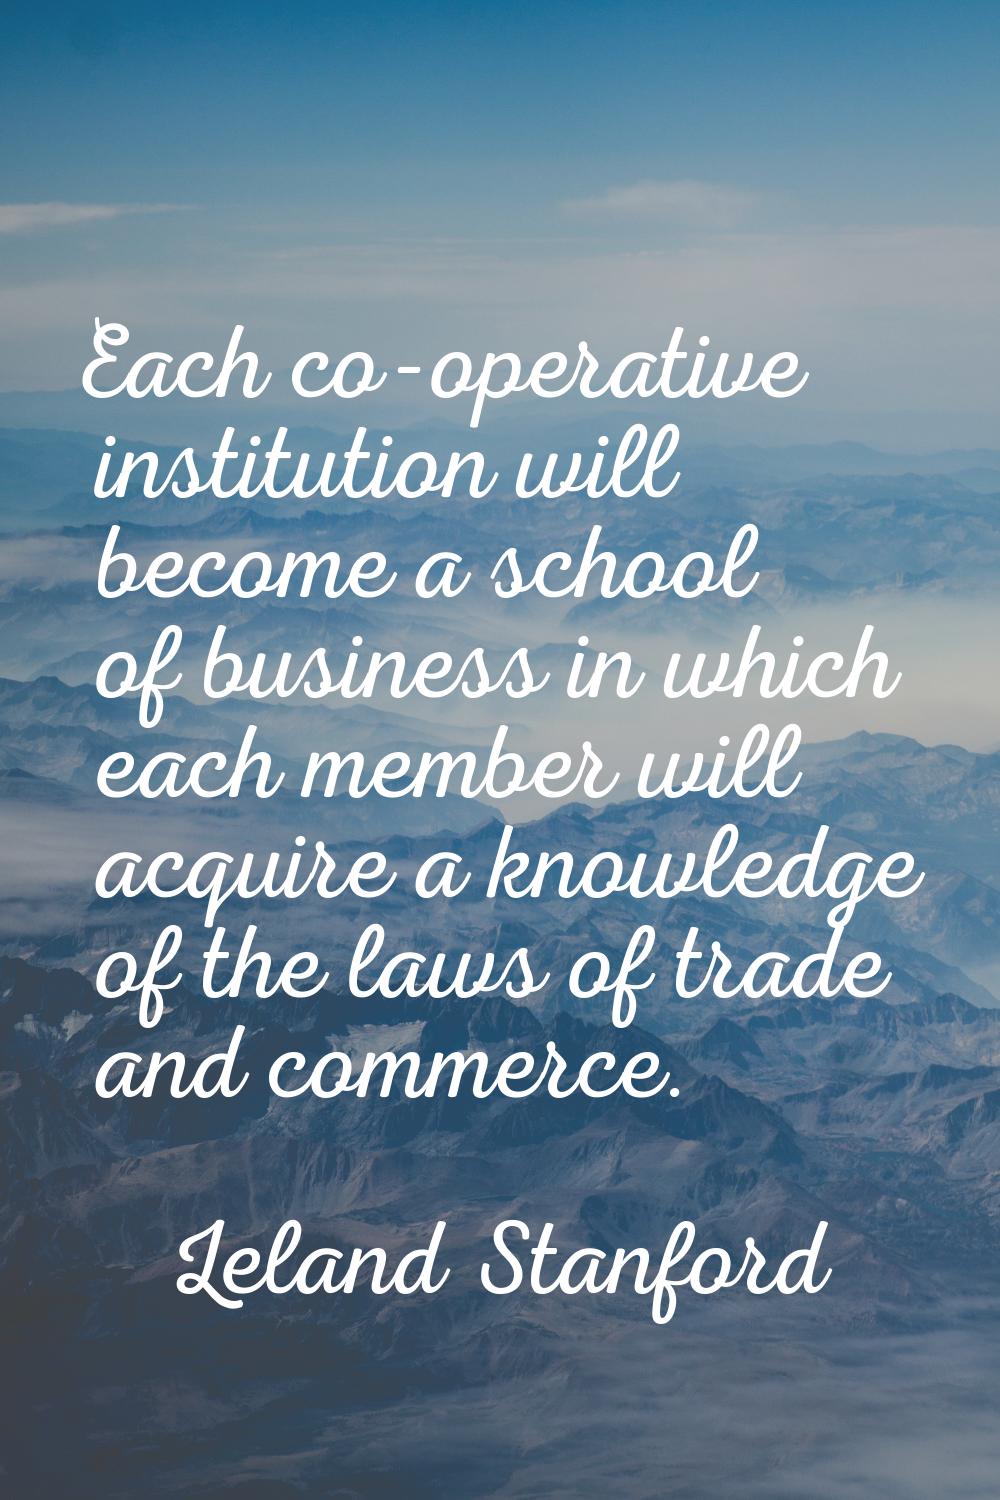 Each co-operative institution will become a school of business in which each member will acquire a 